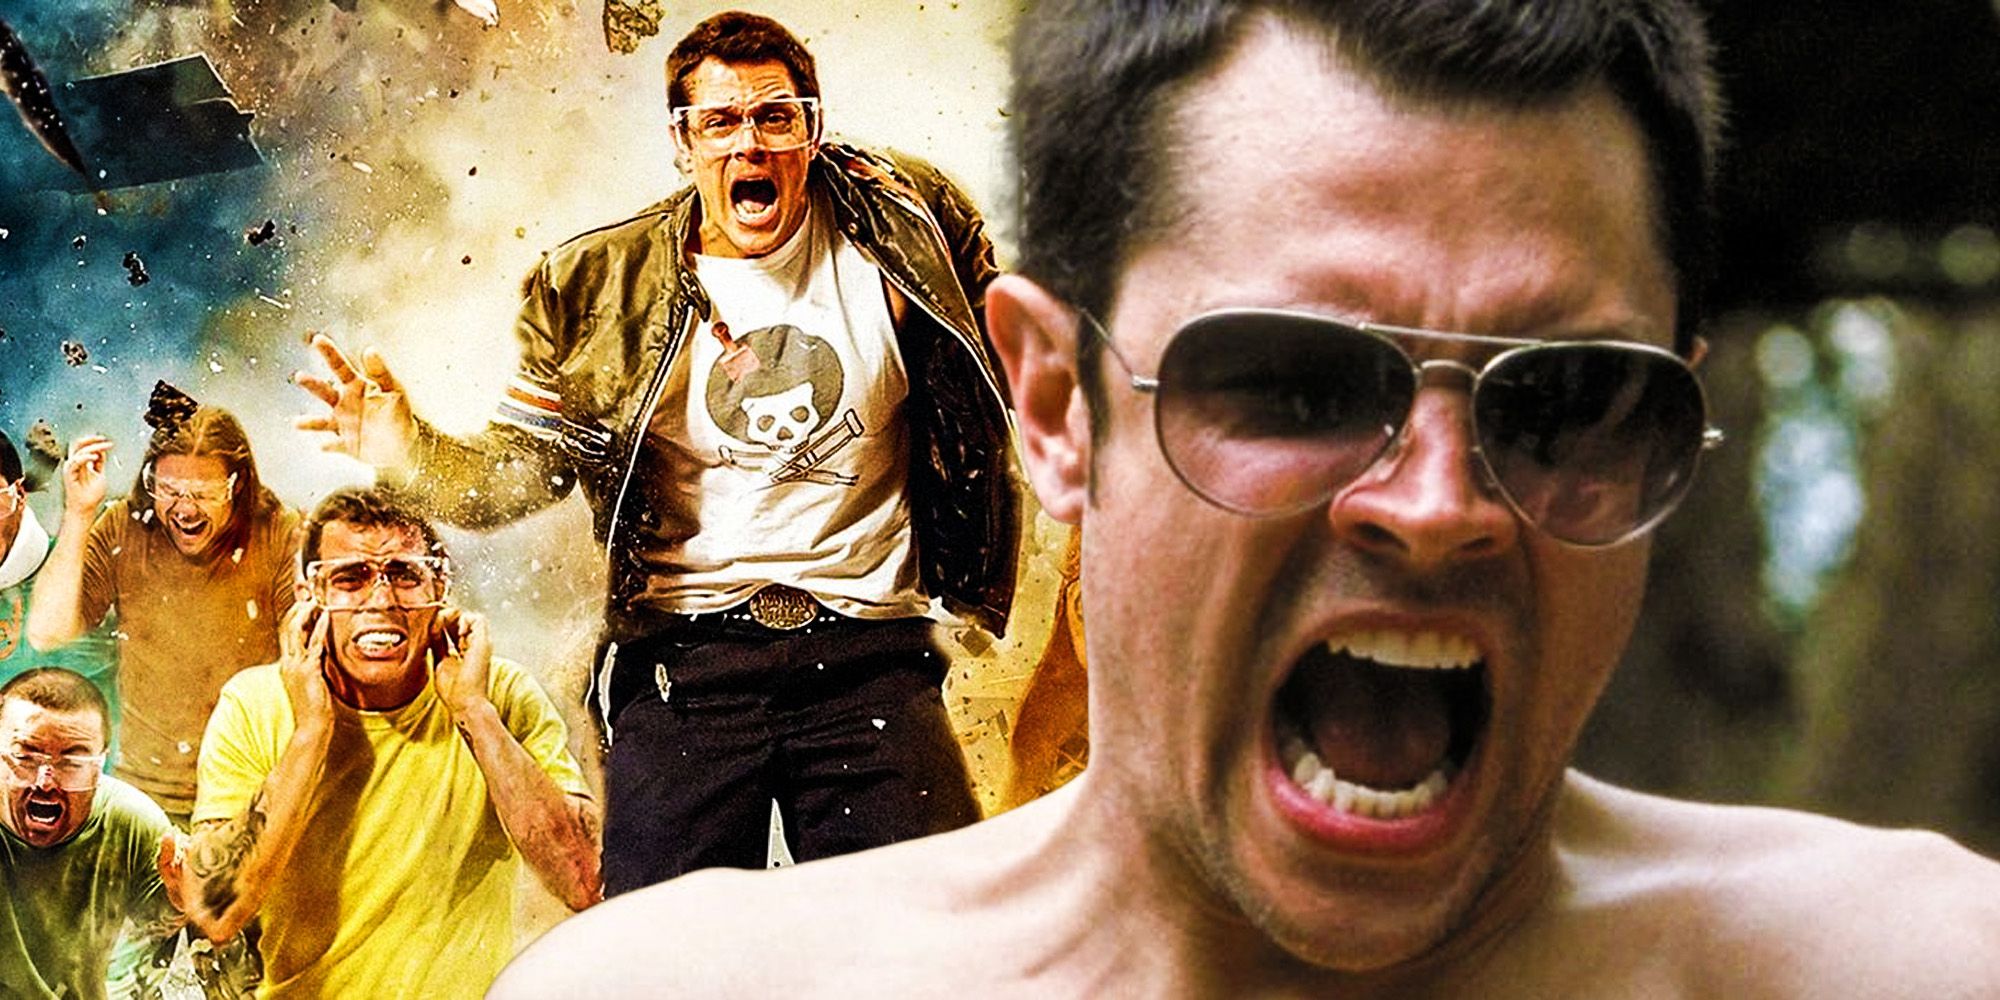 Johnny Knoxville Jackass 4